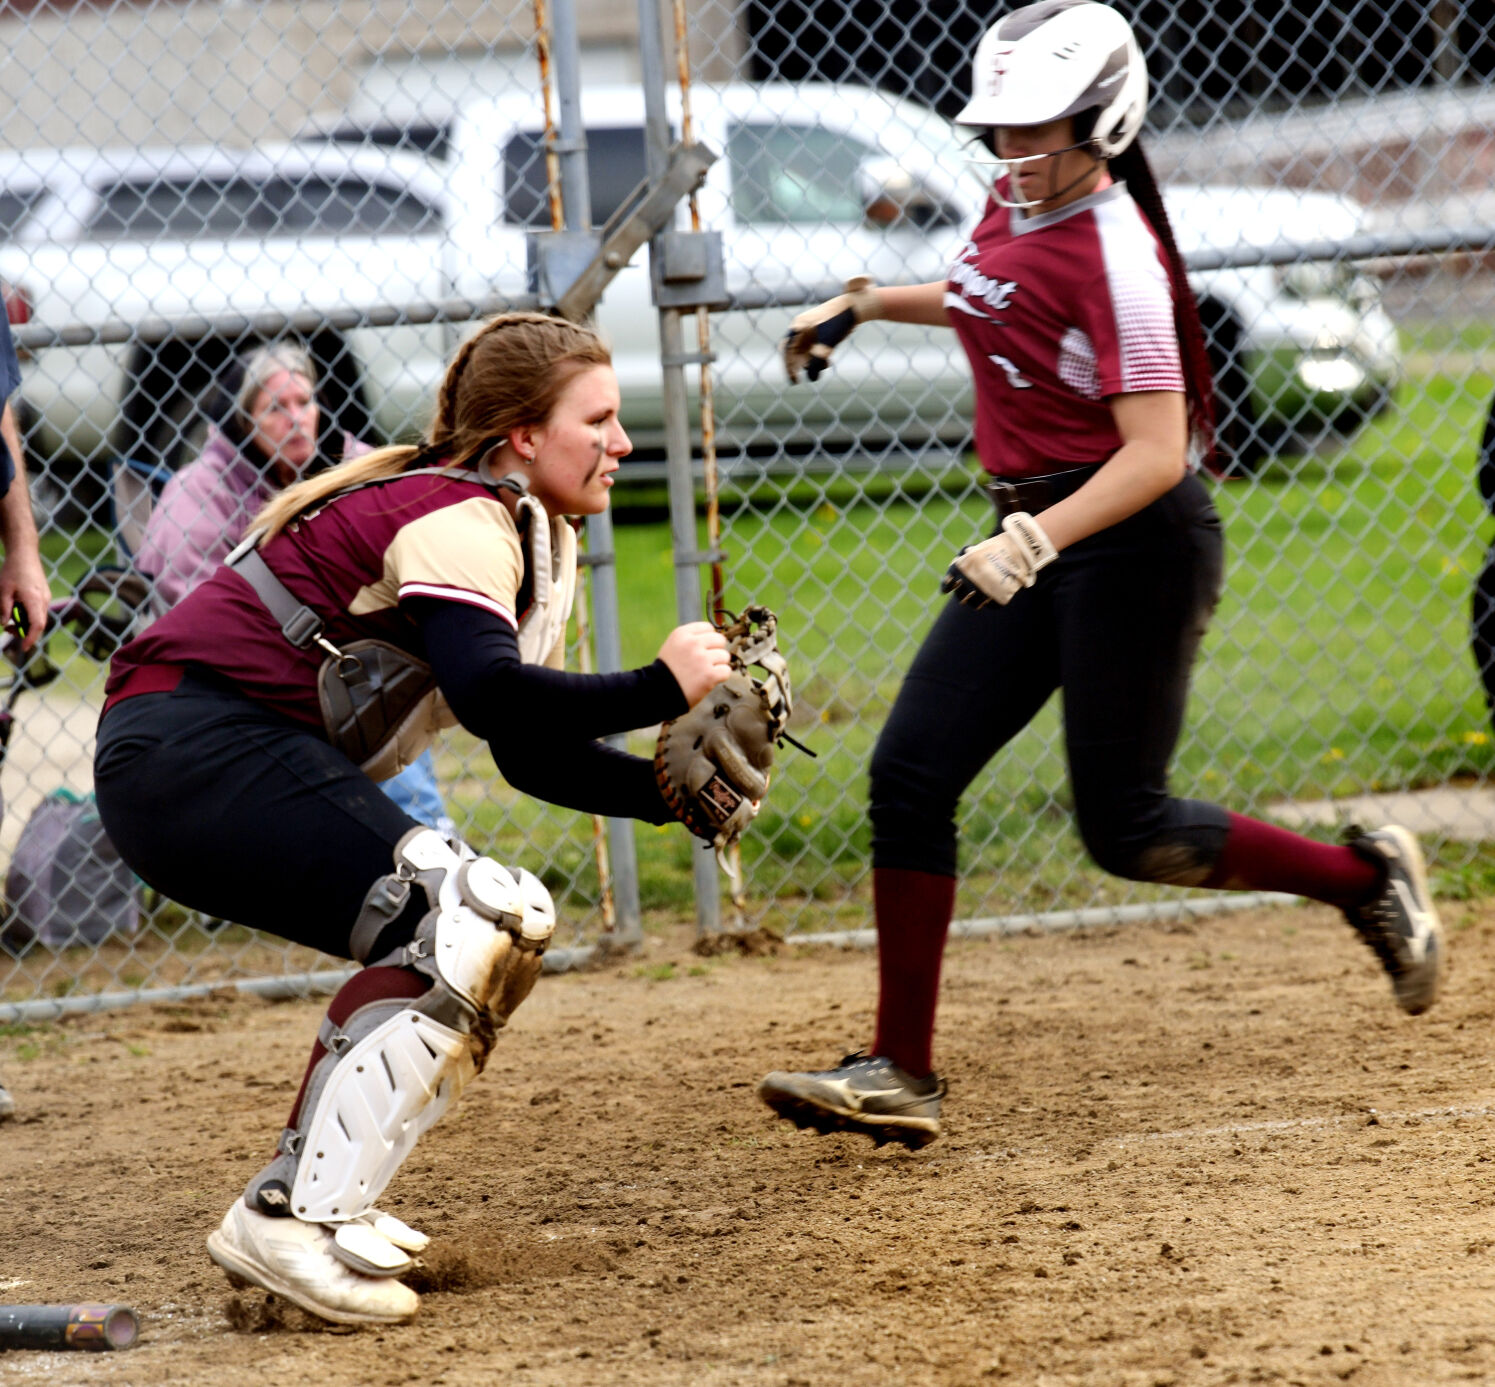 D-III Softball Tournament: Lakers Secure 7th Seed, Pymatuning Valley on Top